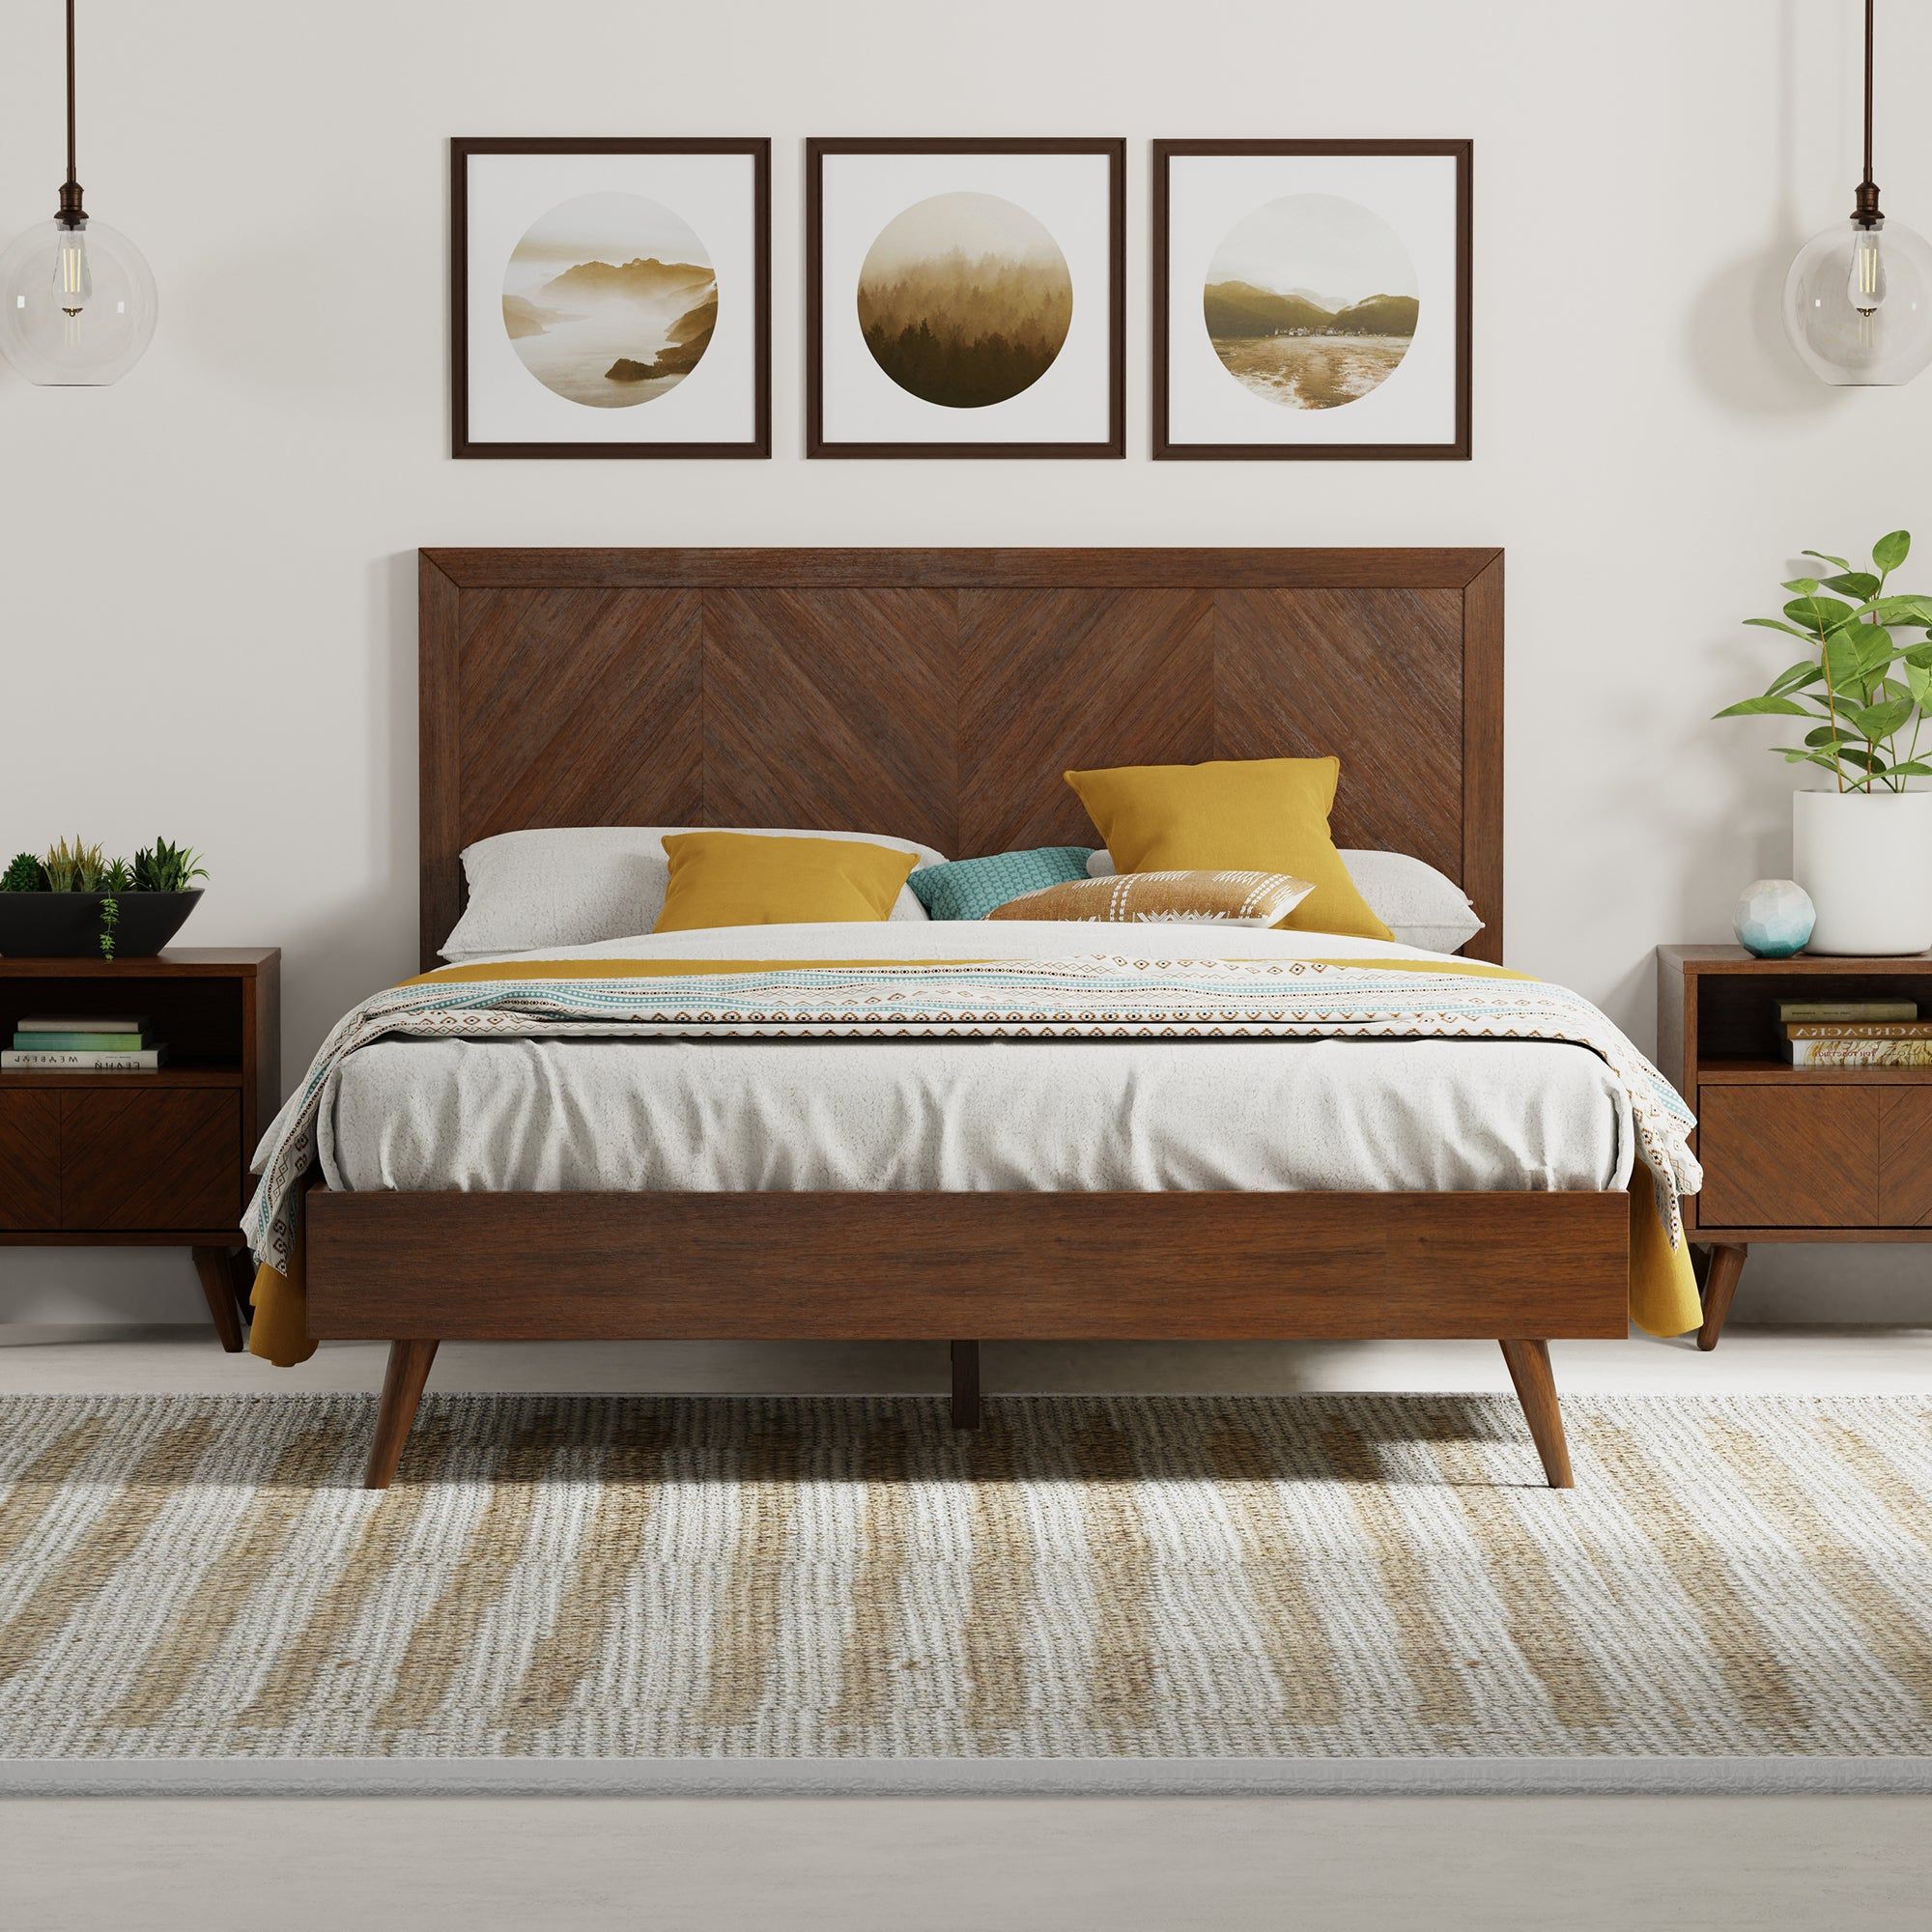 Upgrade Your Bedroom with a Stylish Queen Bed Frame and Headboard